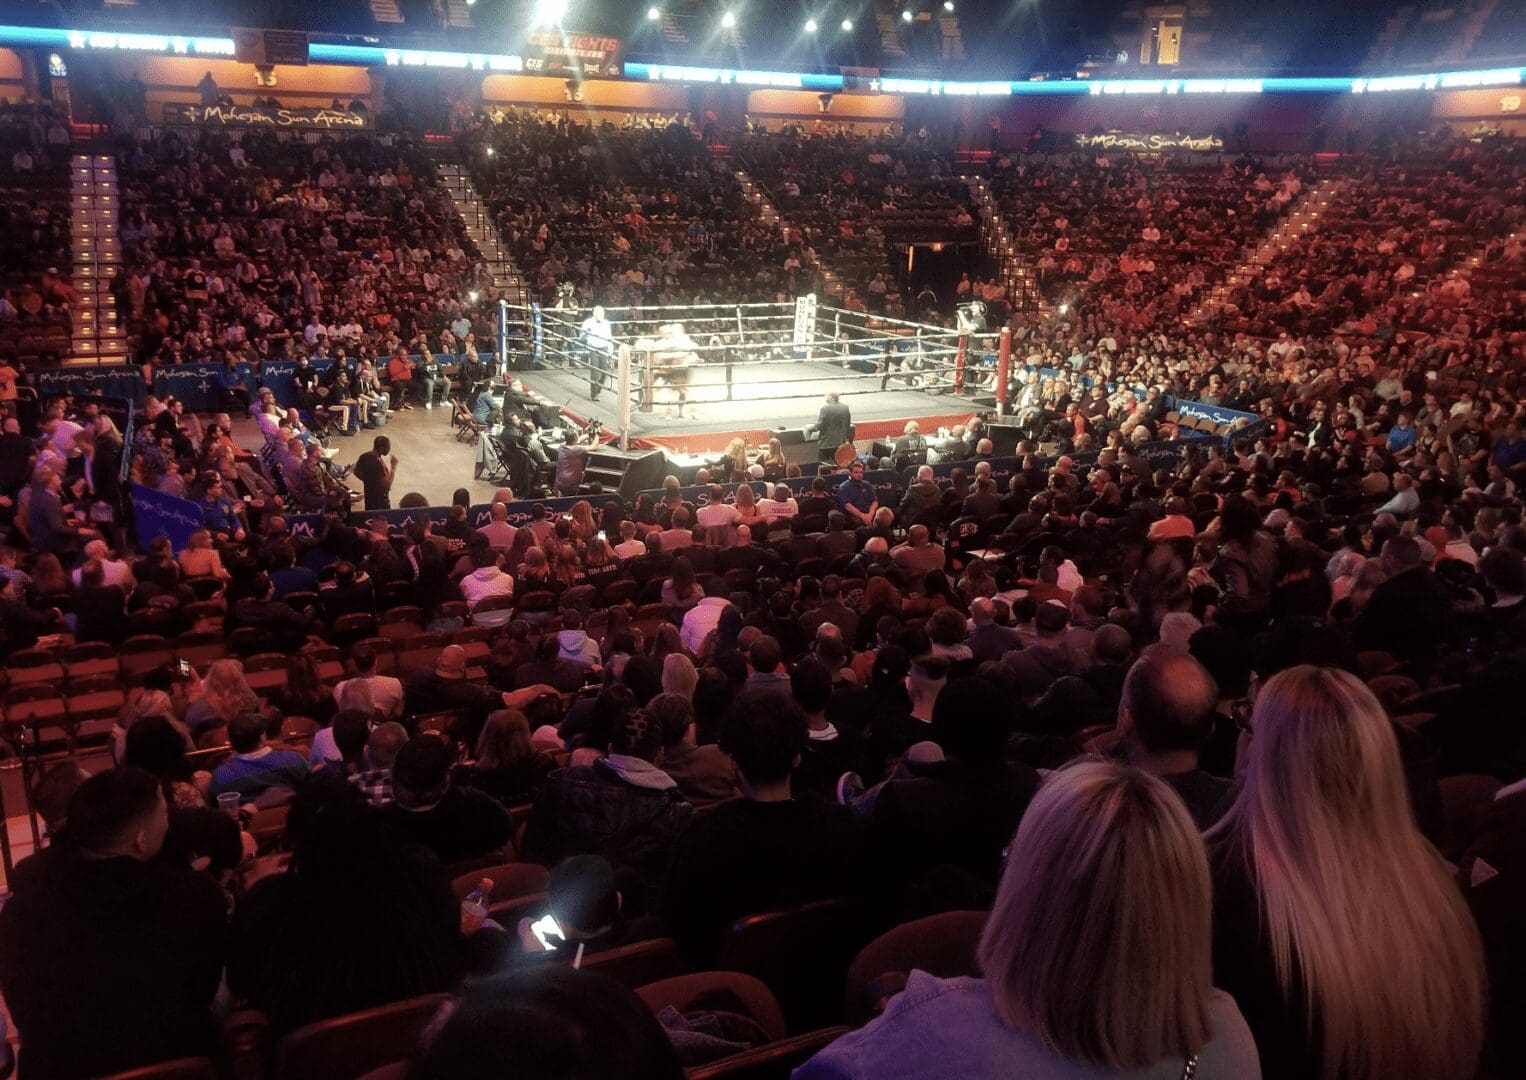 A crowd of people watching a boxing match in an arena.